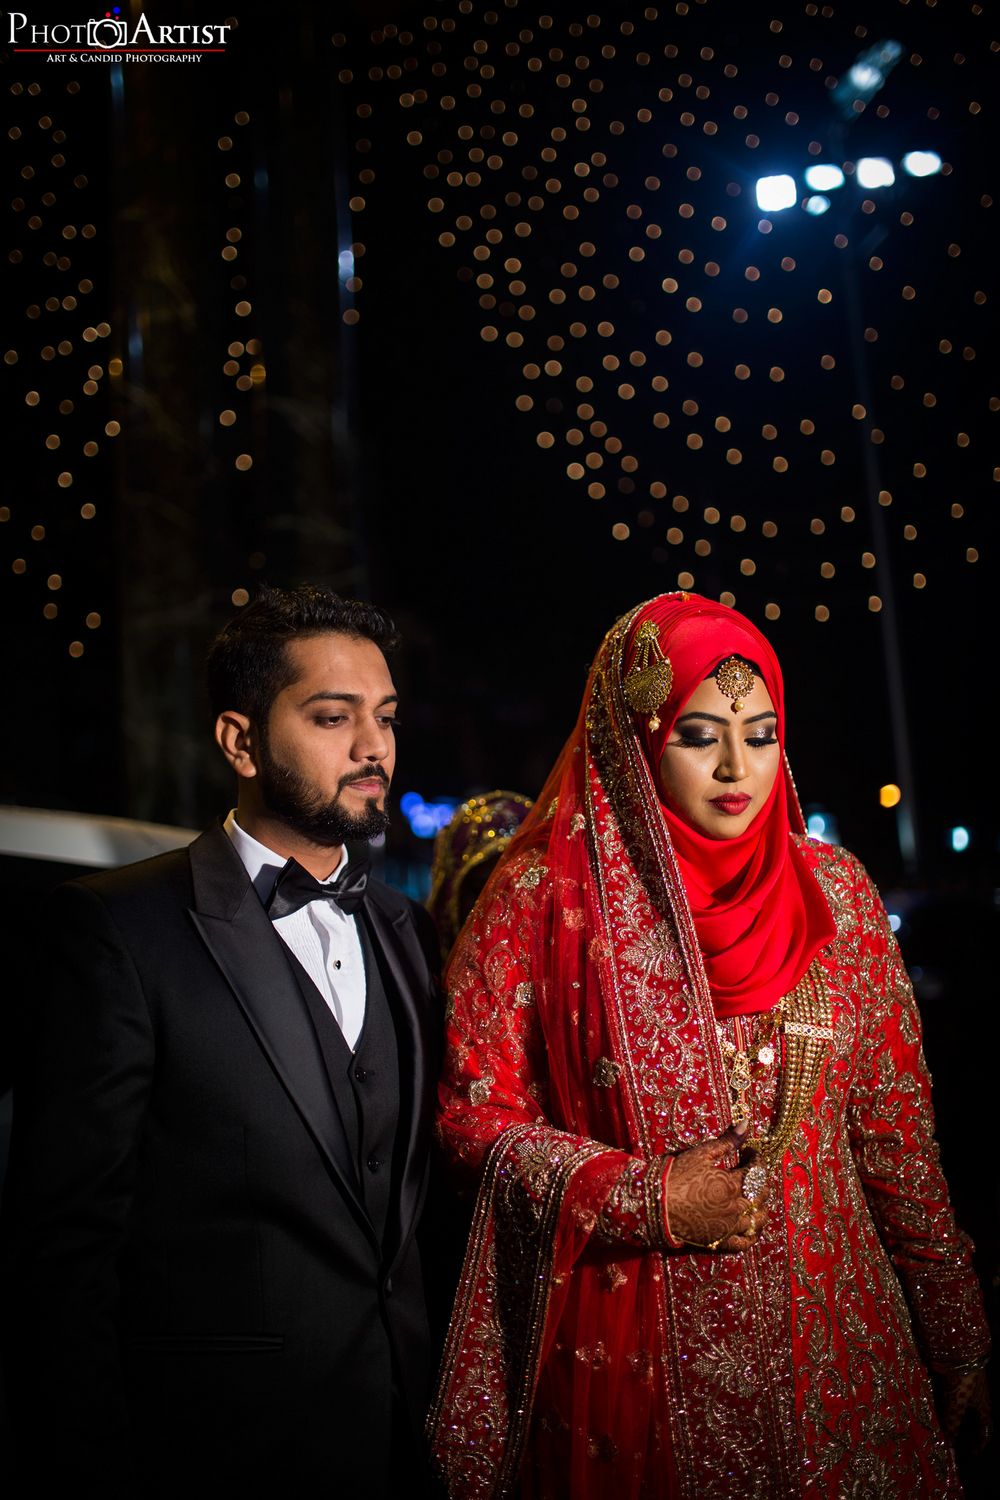 Photo From Islamic Muslim Weddings - By PhotoArtist Art and Candid Photography